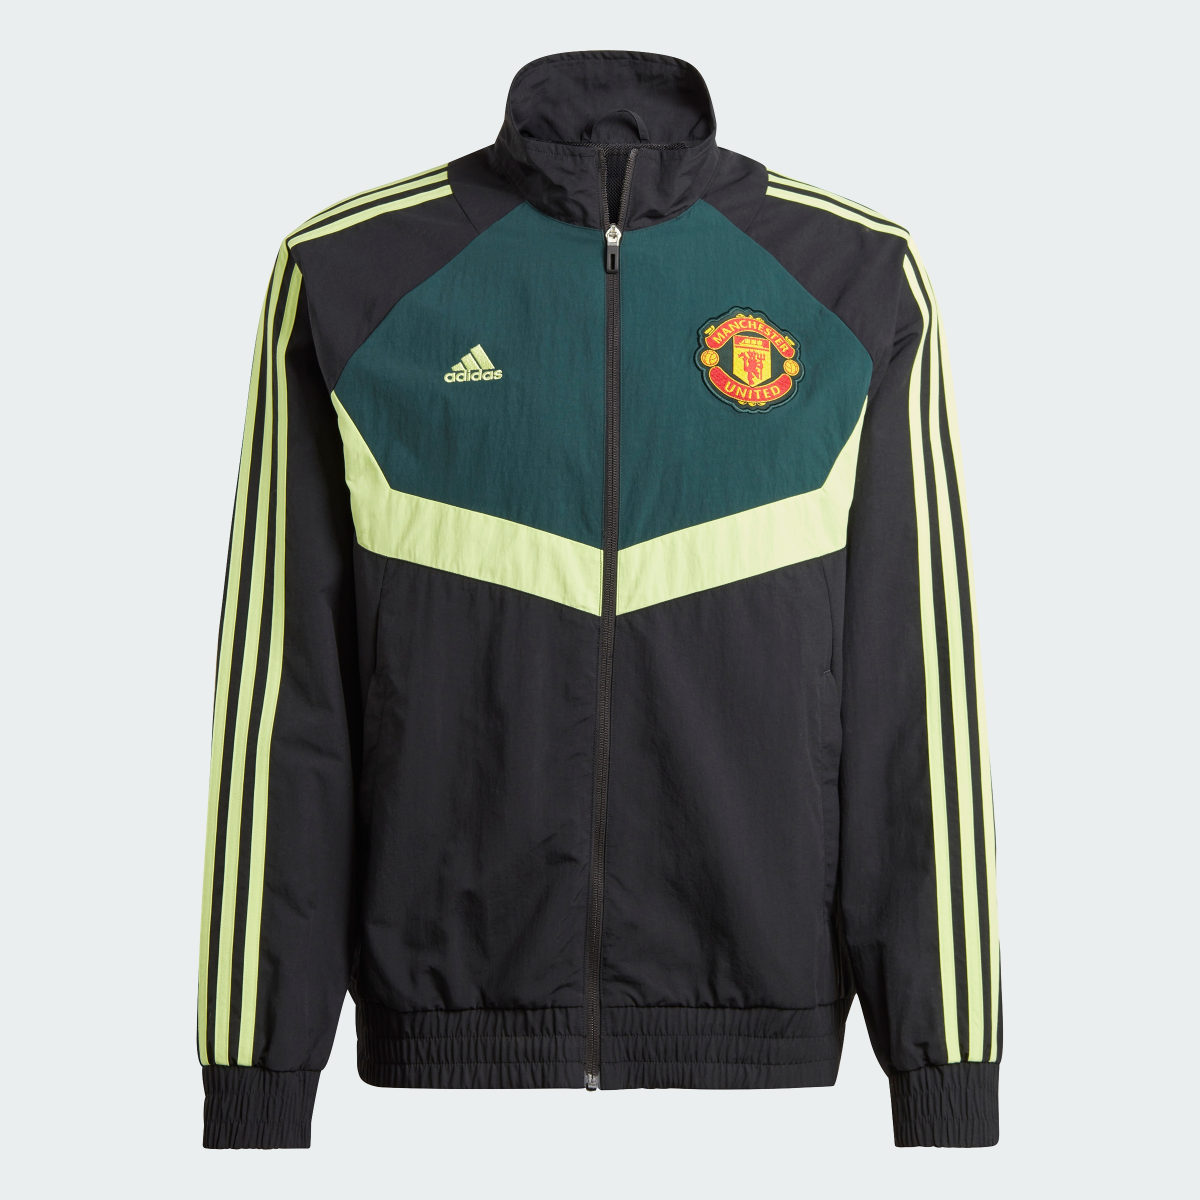 Adidas Manchester United Woven Track Top. 5